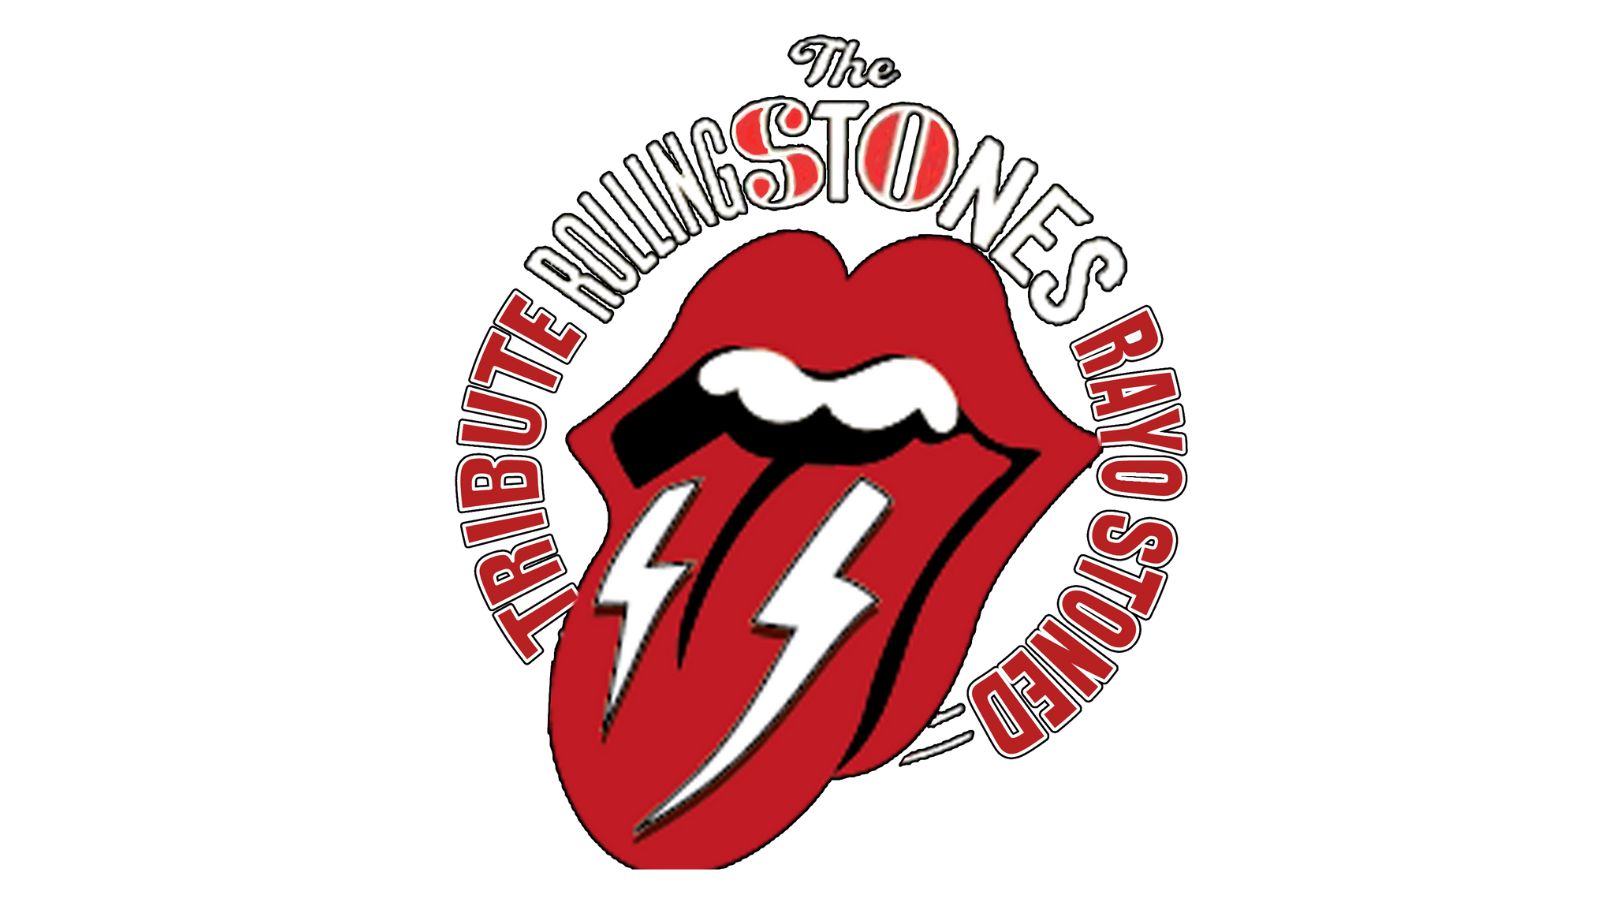 Rayo Stoned . Tributo a los Rolling Stones